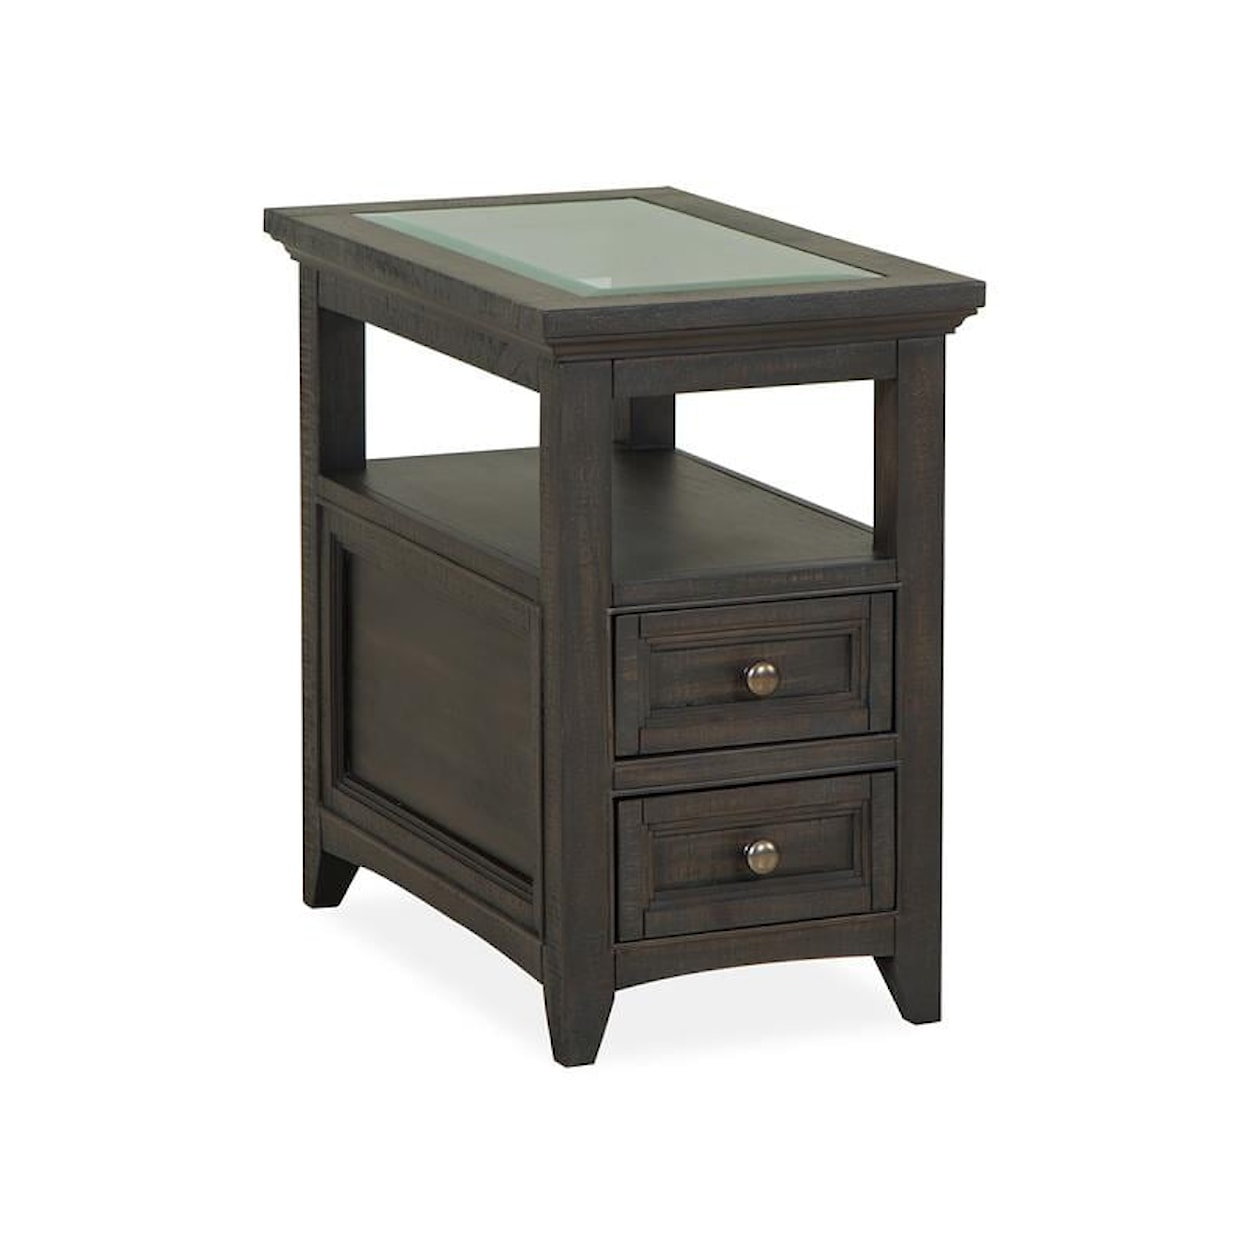 Magnussen Home Westley Falls Occasional Tables Chairside End Table